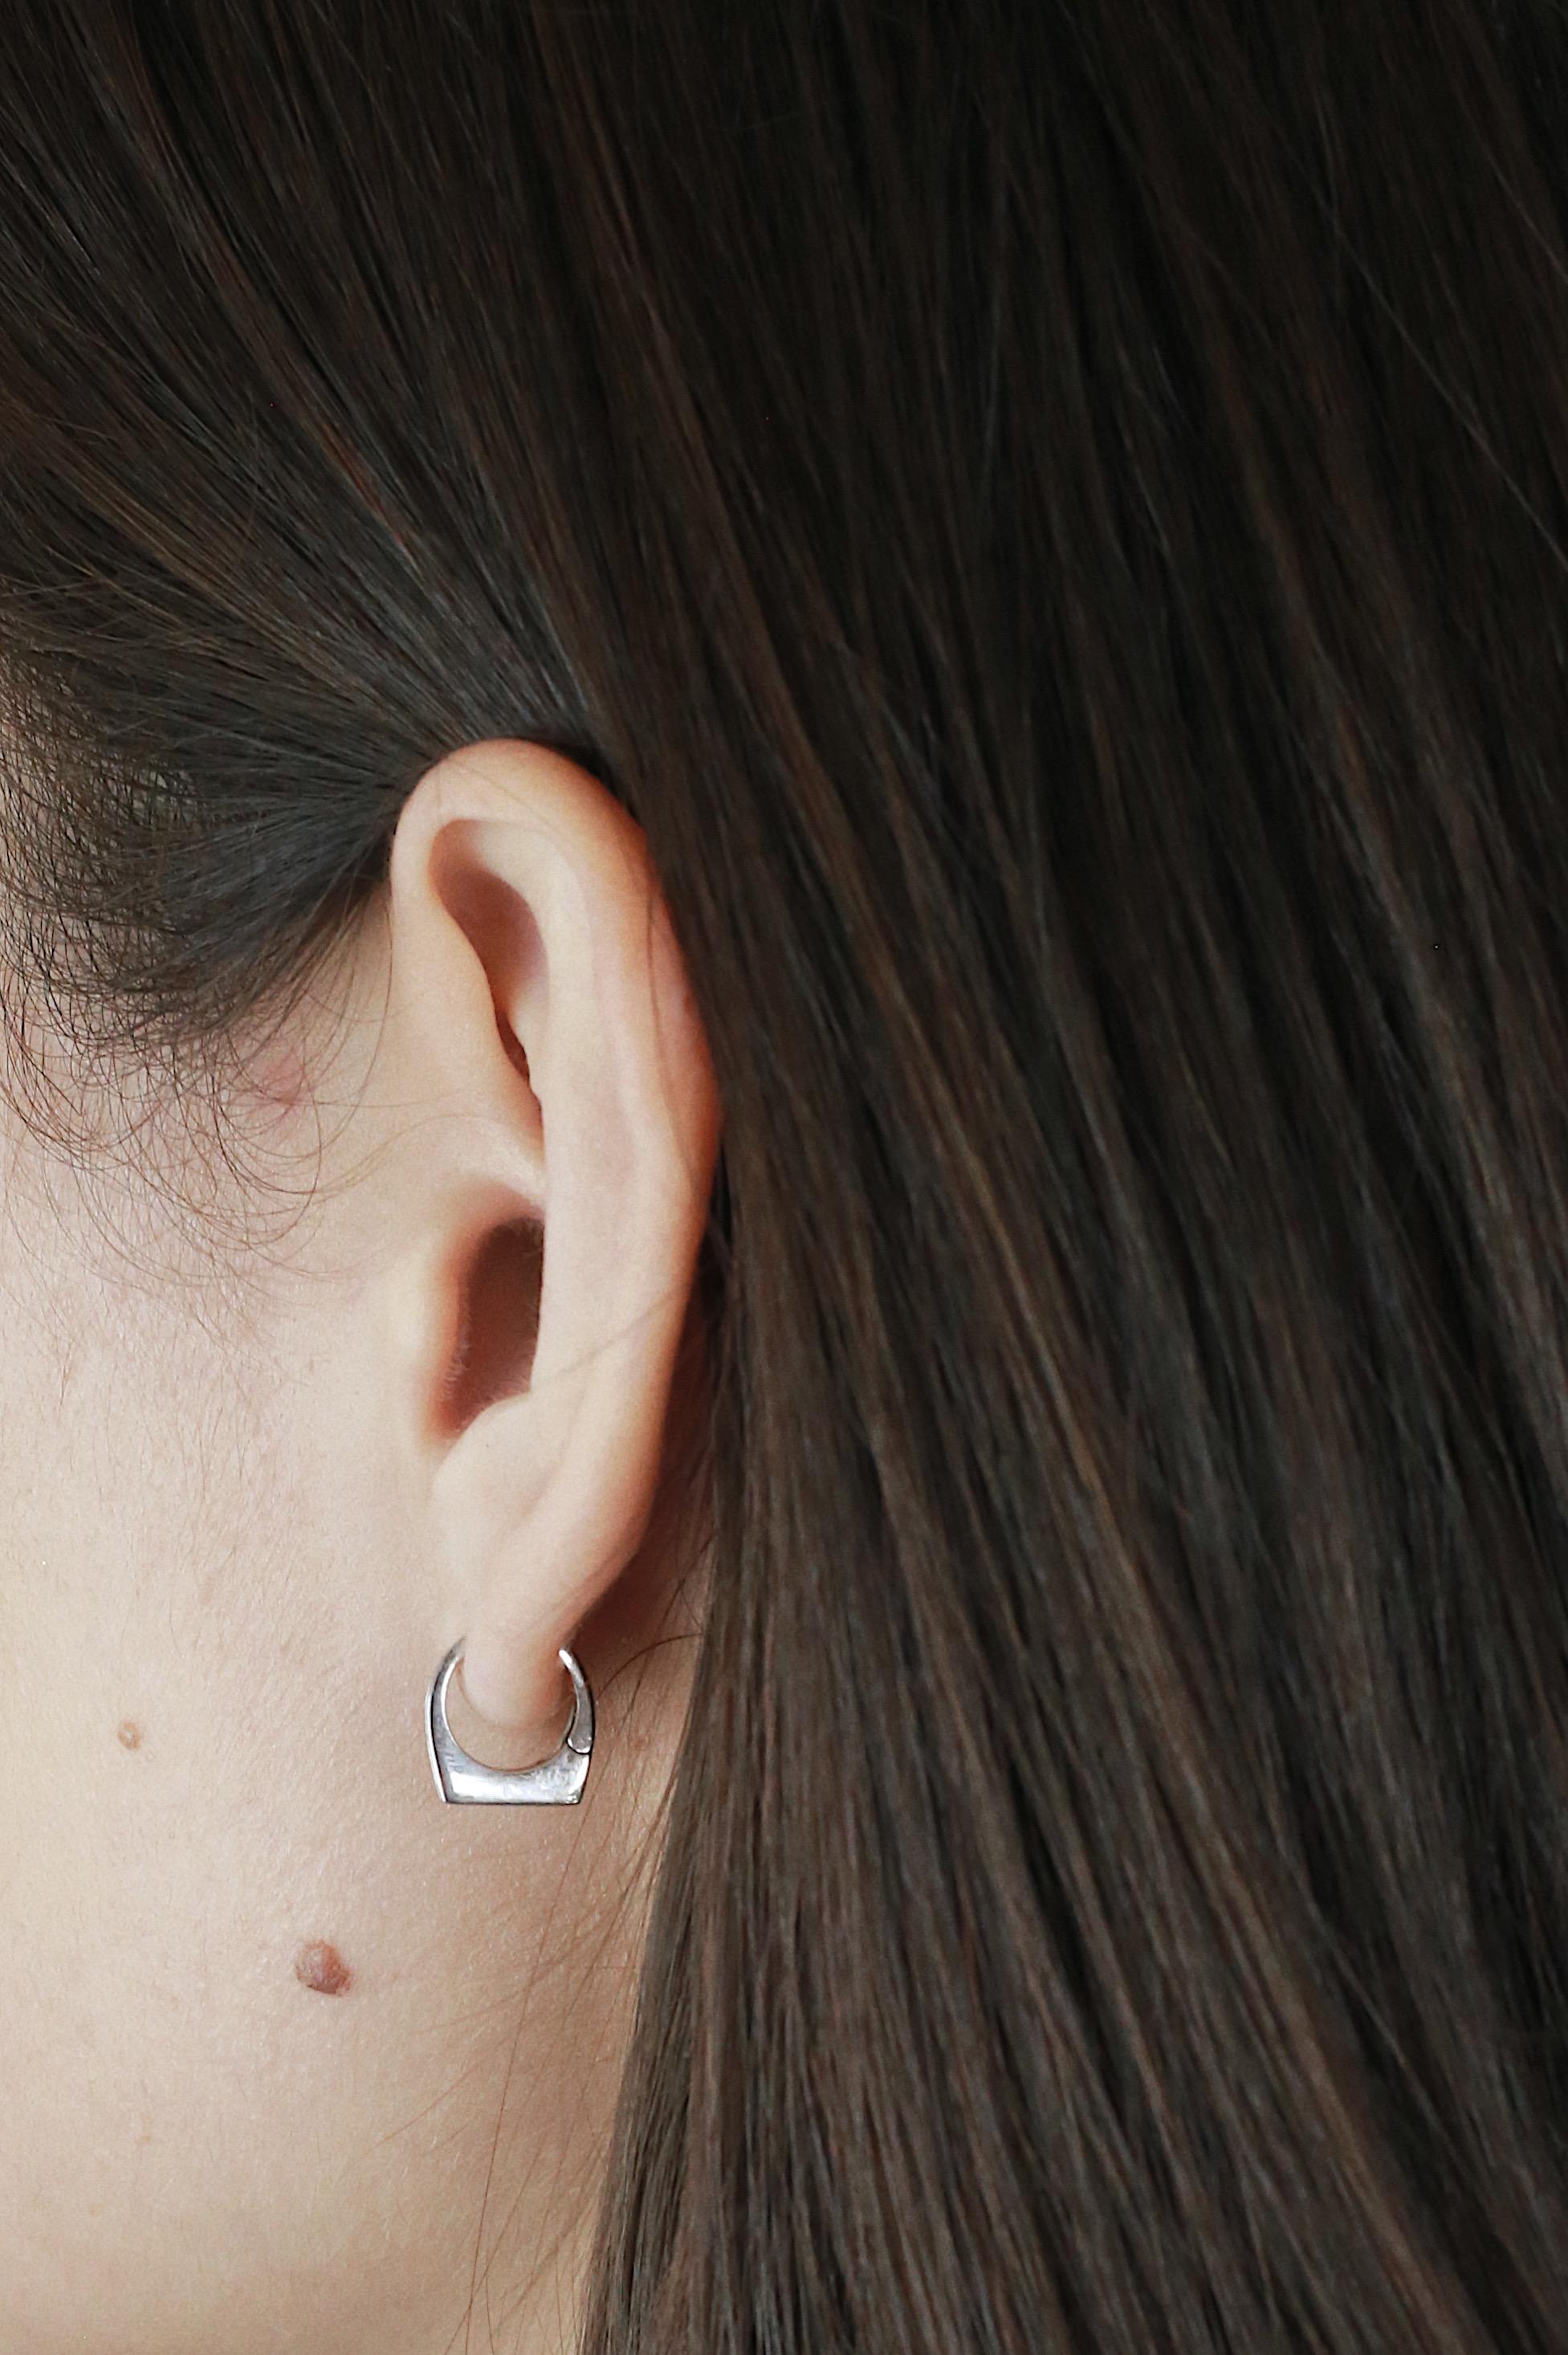 Sold by the unit

These sculptural mini hoops are no less chic than the bigger version Dois Irmãos Earclips and they work extraordinarily well for the day-to-day.

The ‘Dois Irmãos’ family was named after the Dois Irmãos Hill, which has one of the